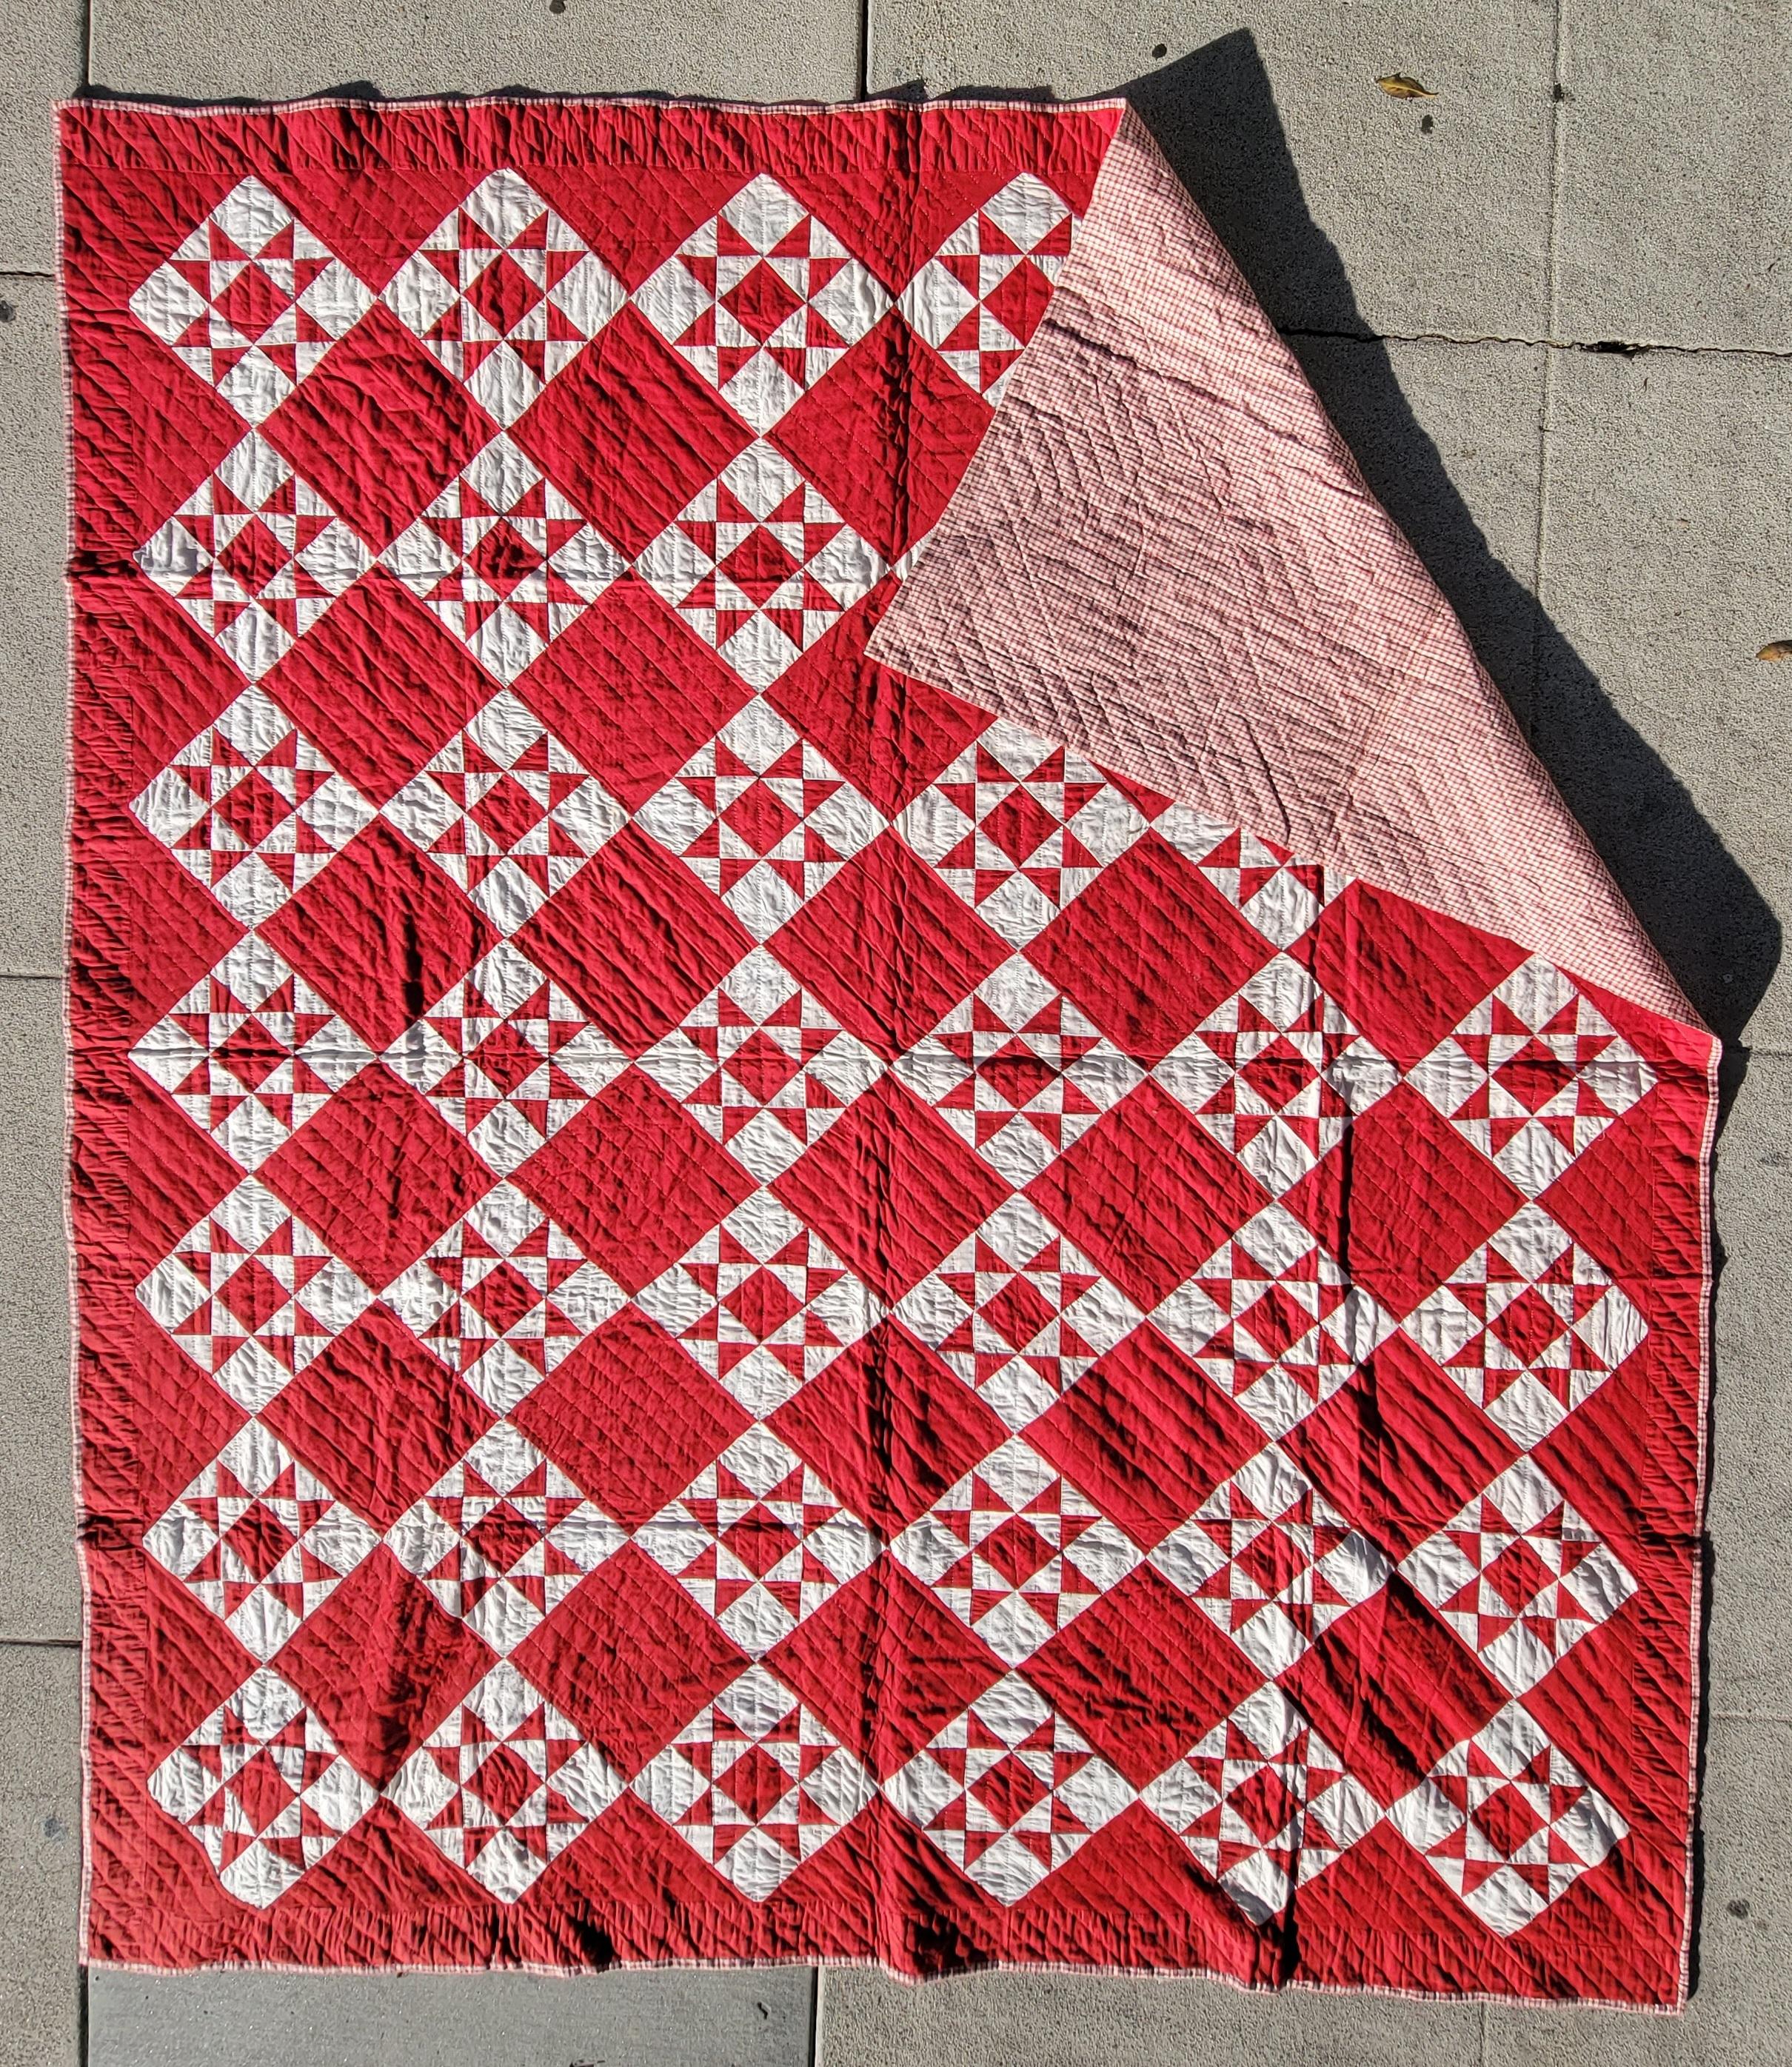 This fine folky red & white eight point star is in pristine condition and has an amazing red & white checked gingham backing. Was found in a private estate in Ohio. Just amazing deep red color !